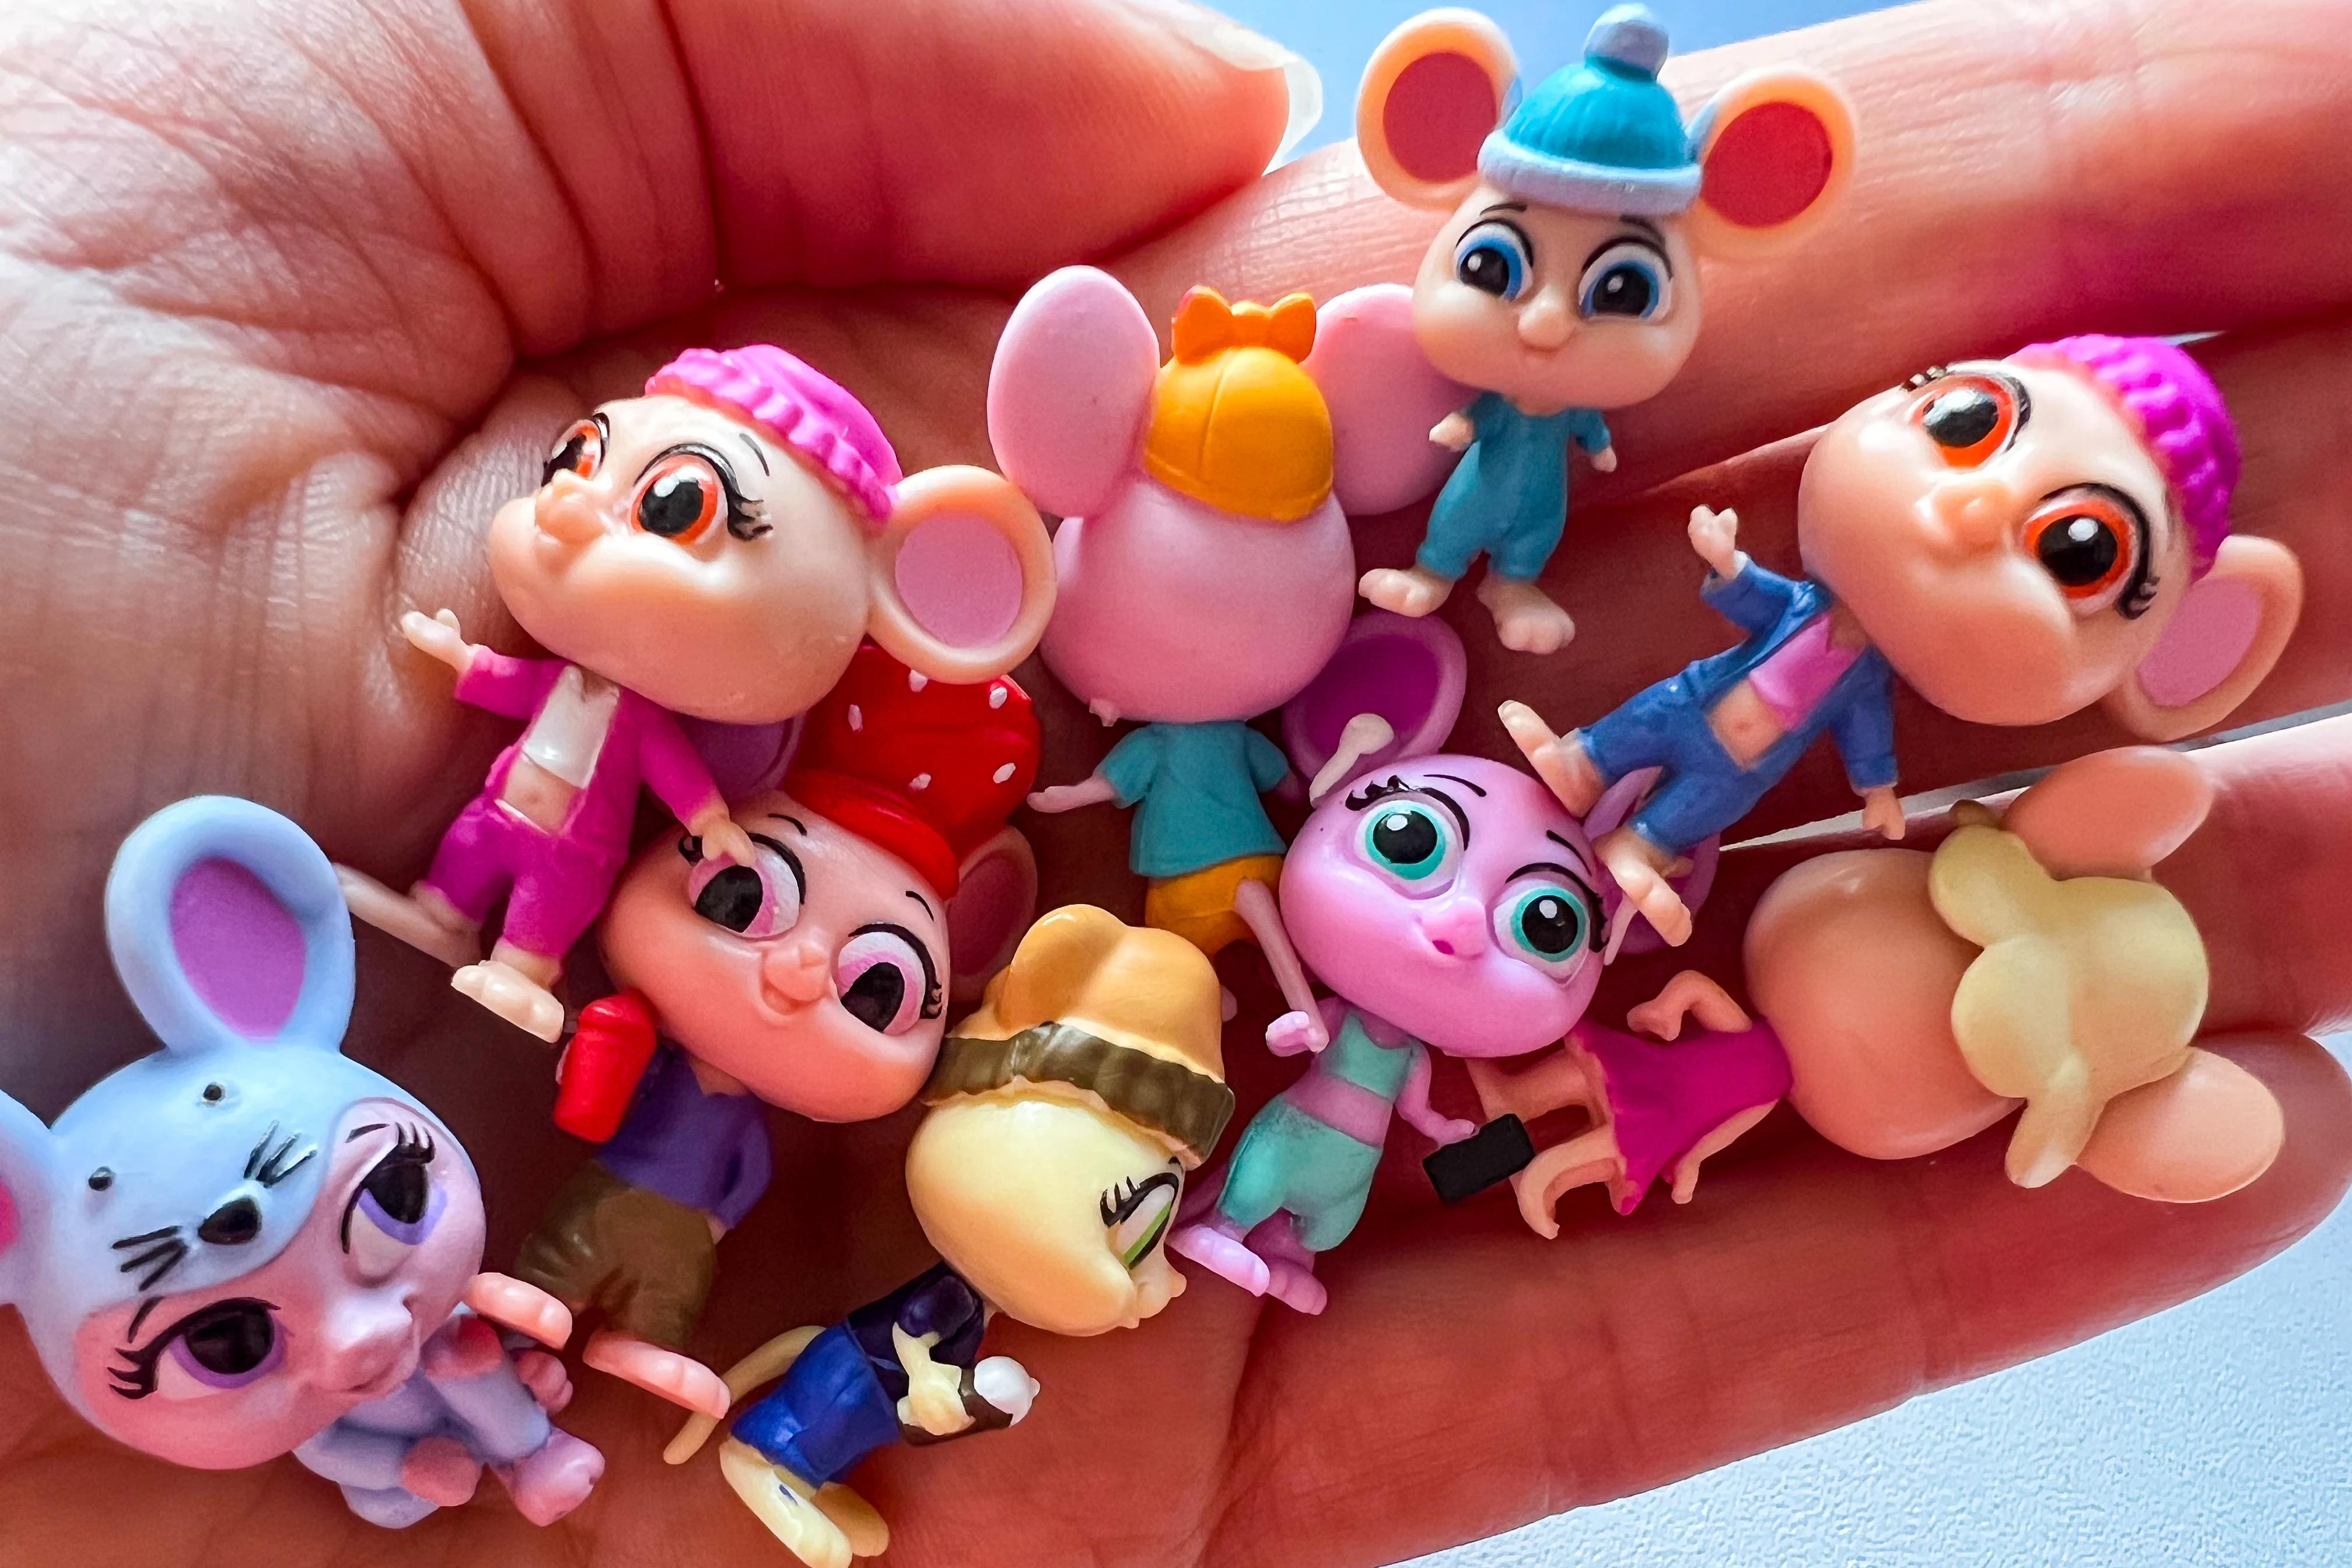 A hand full of small plastic mice toys from Millie & Friend Mouse In The House range